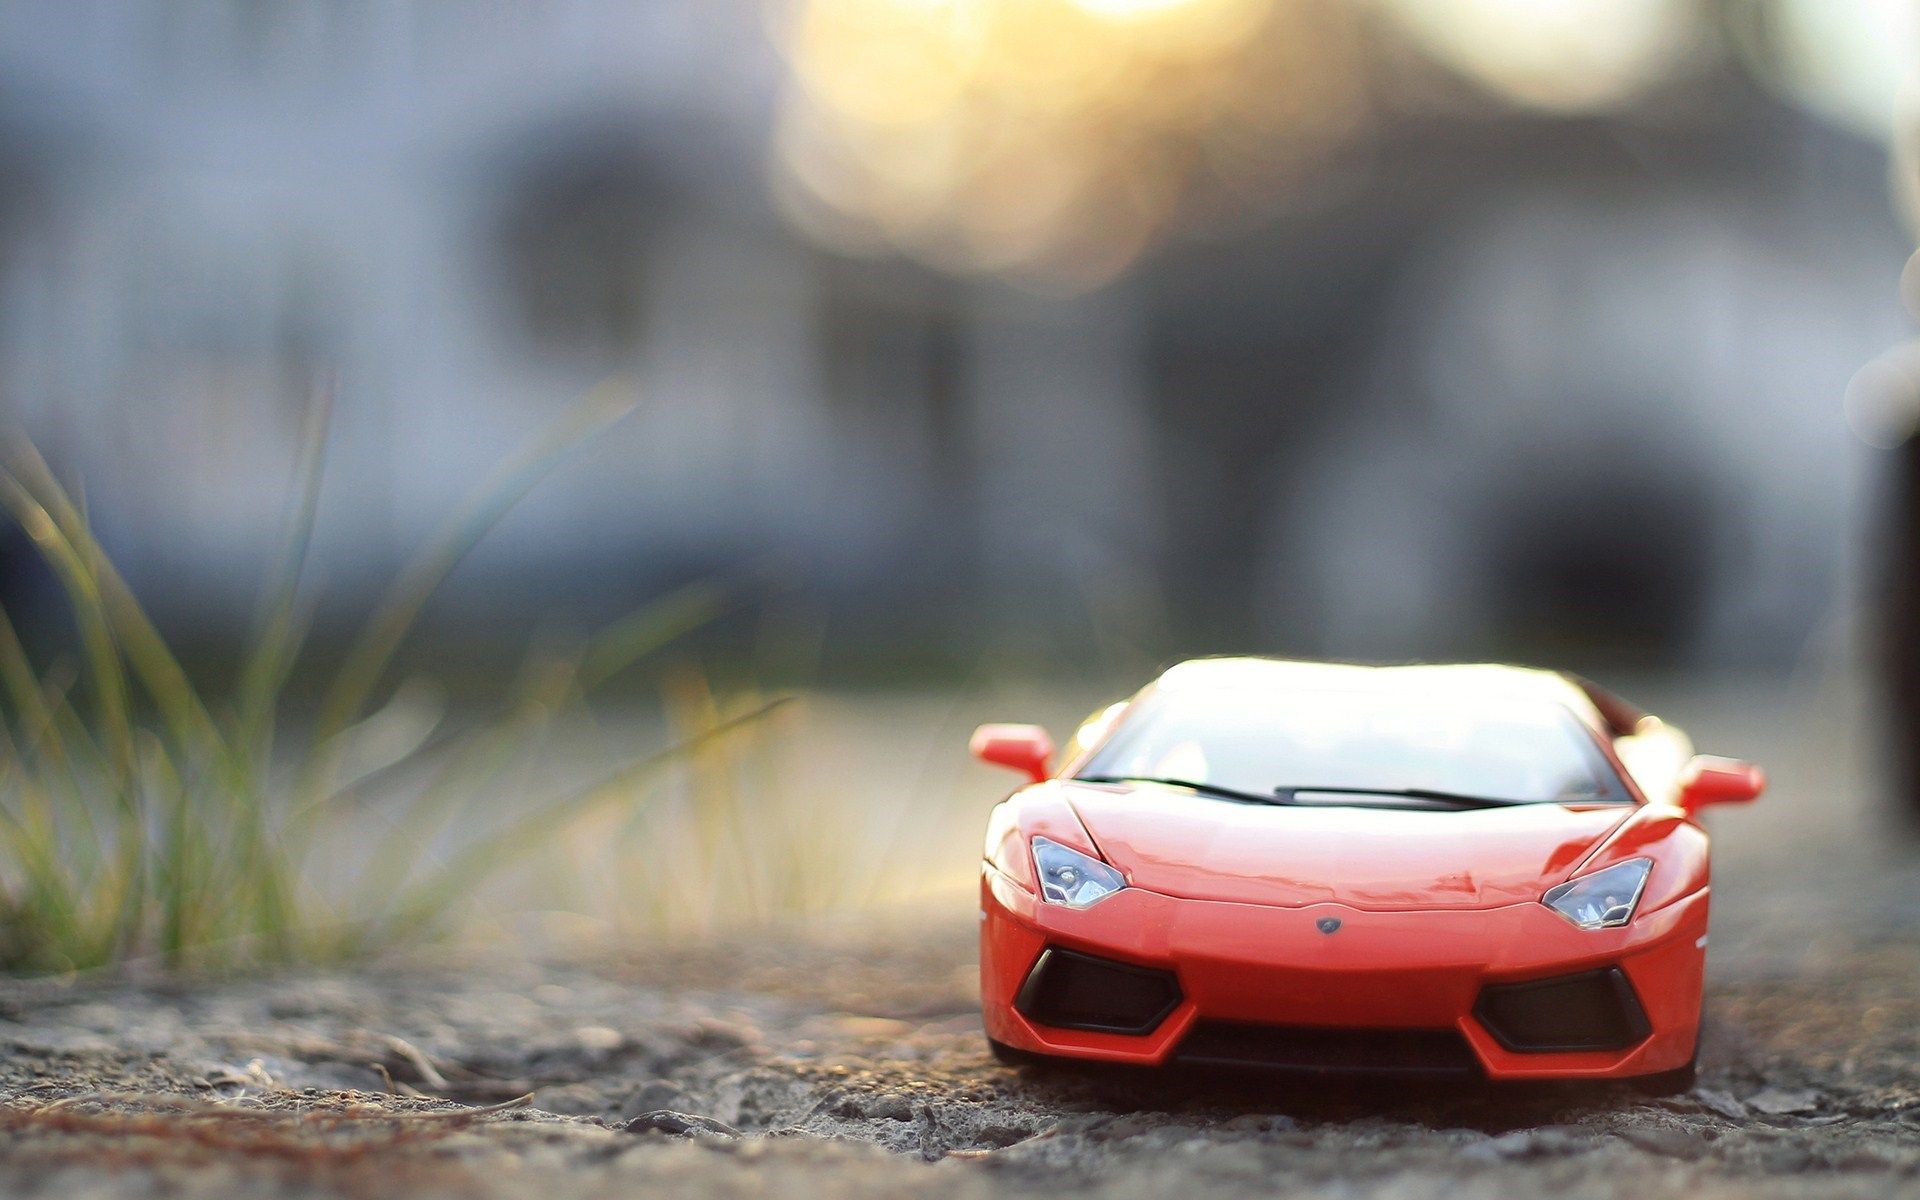 HD wallpaper, Car, Wallpaper, Awesome, Toy